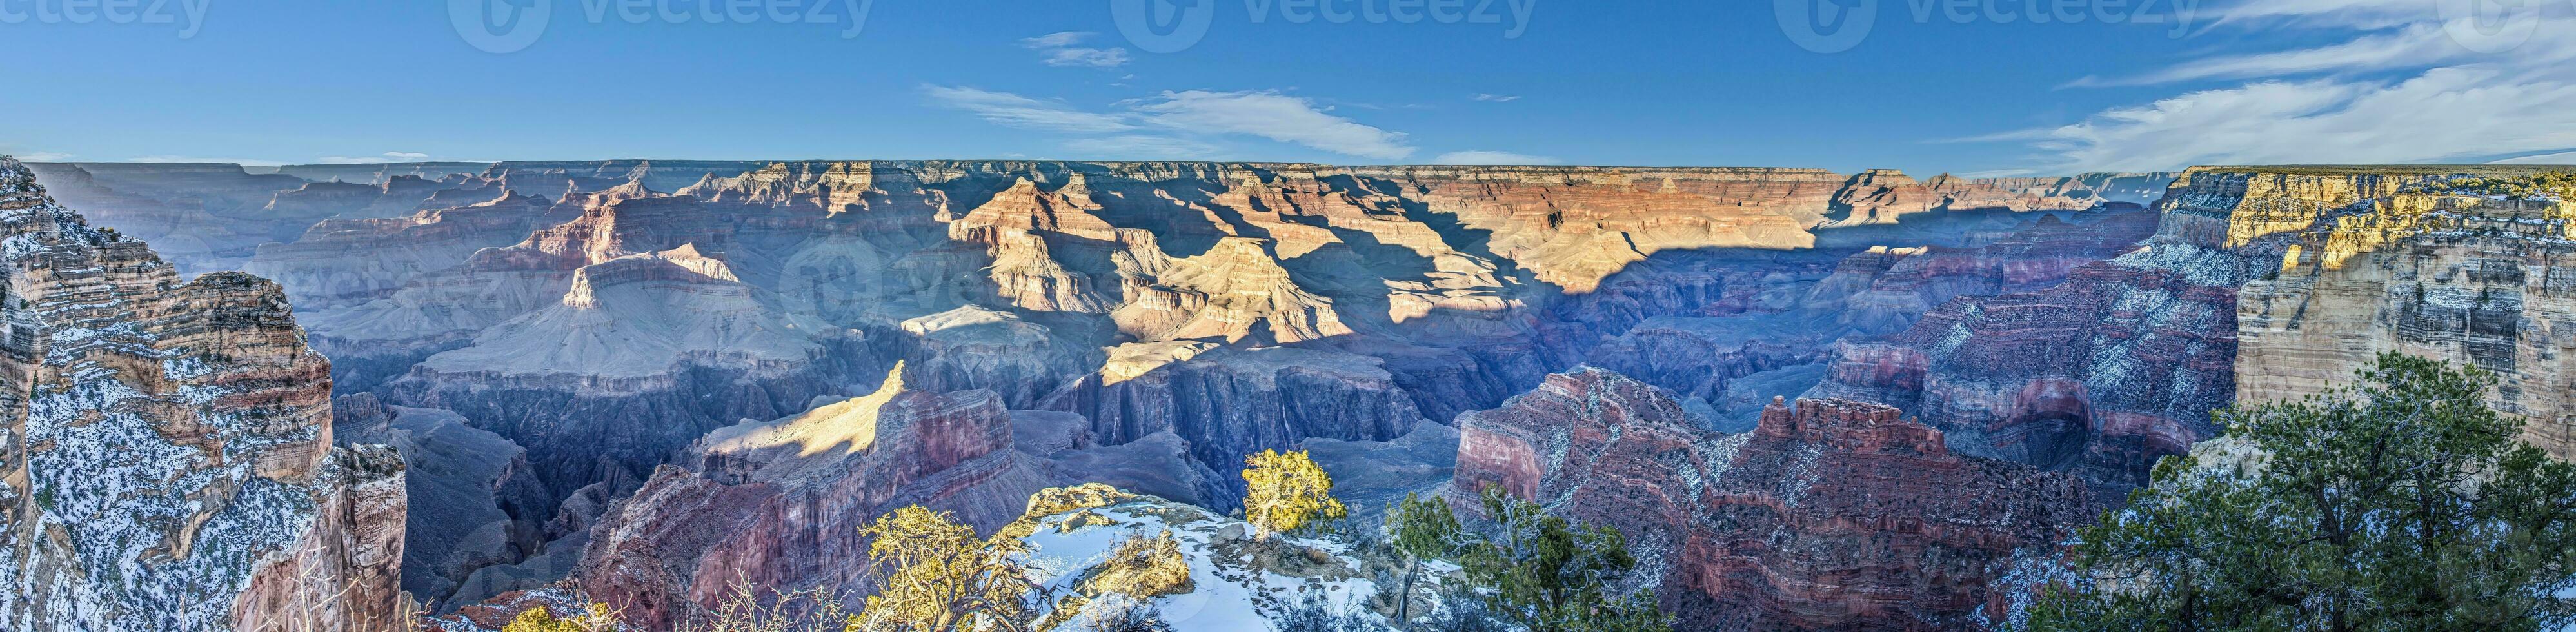 Panorama picture over Grand Canyon with blue sky in Arizona photo